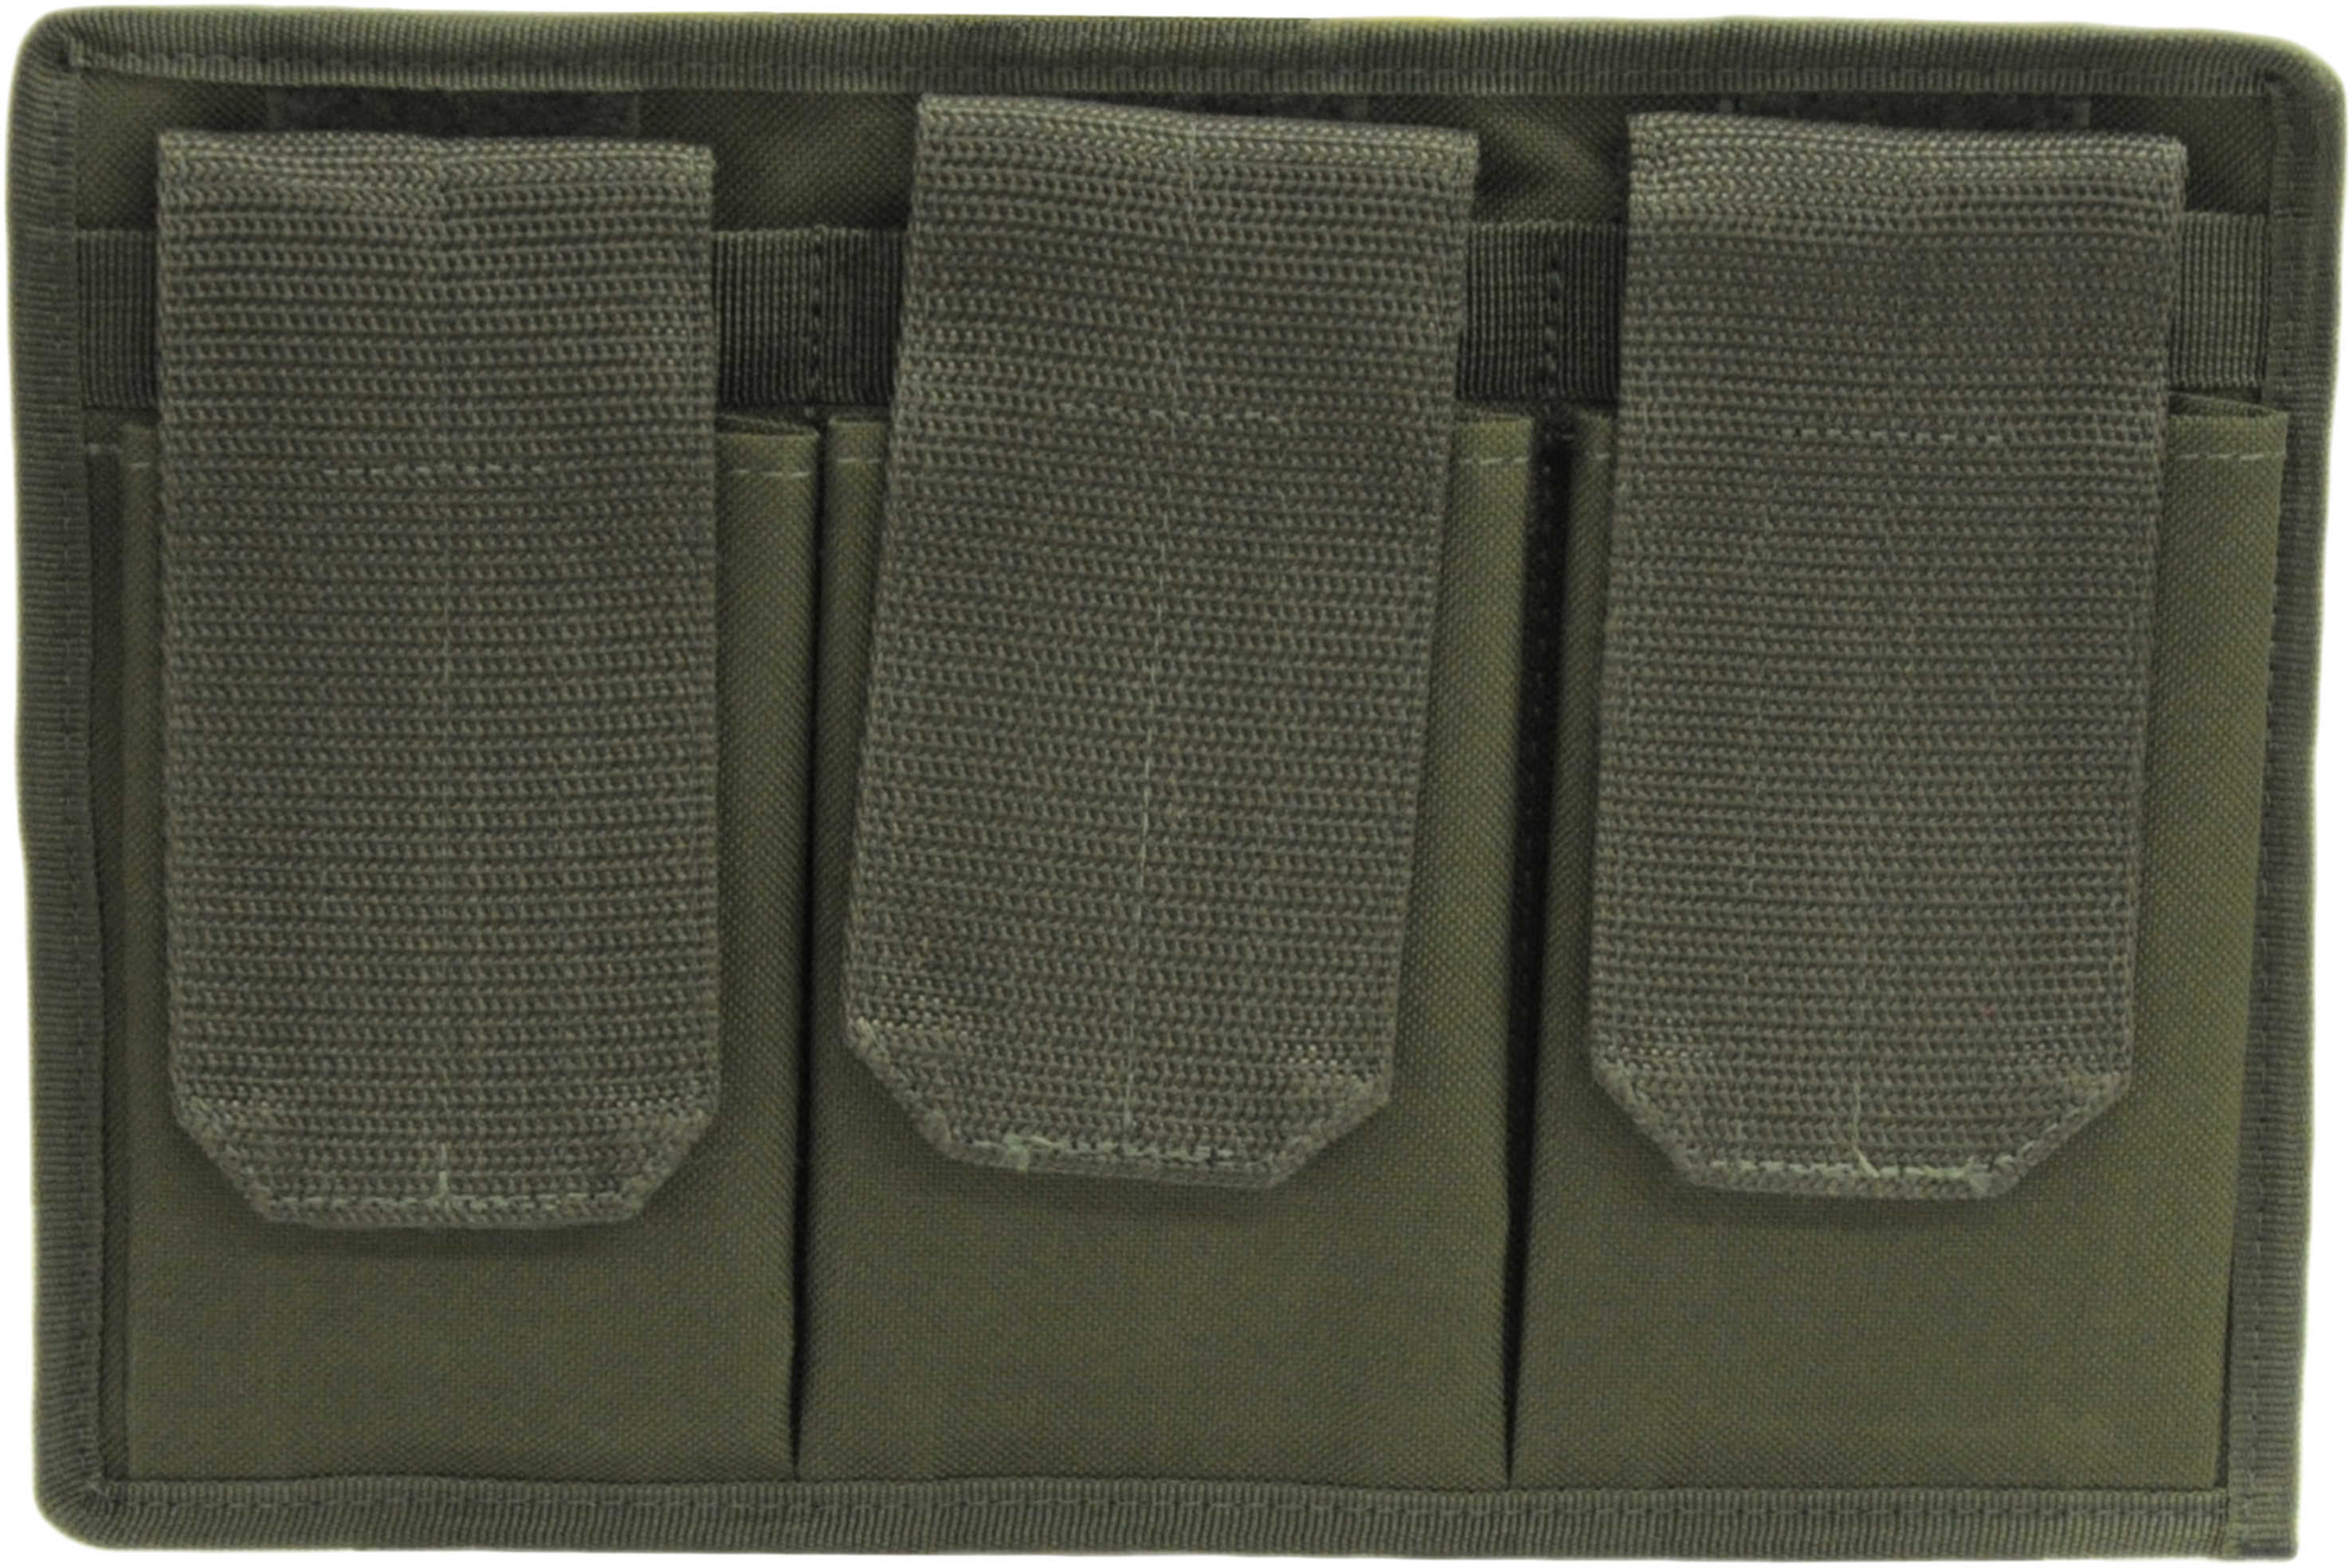 3 Pocket Magazine Pouch with Velcro Back - Oluve Drab Md: SQMP340OD